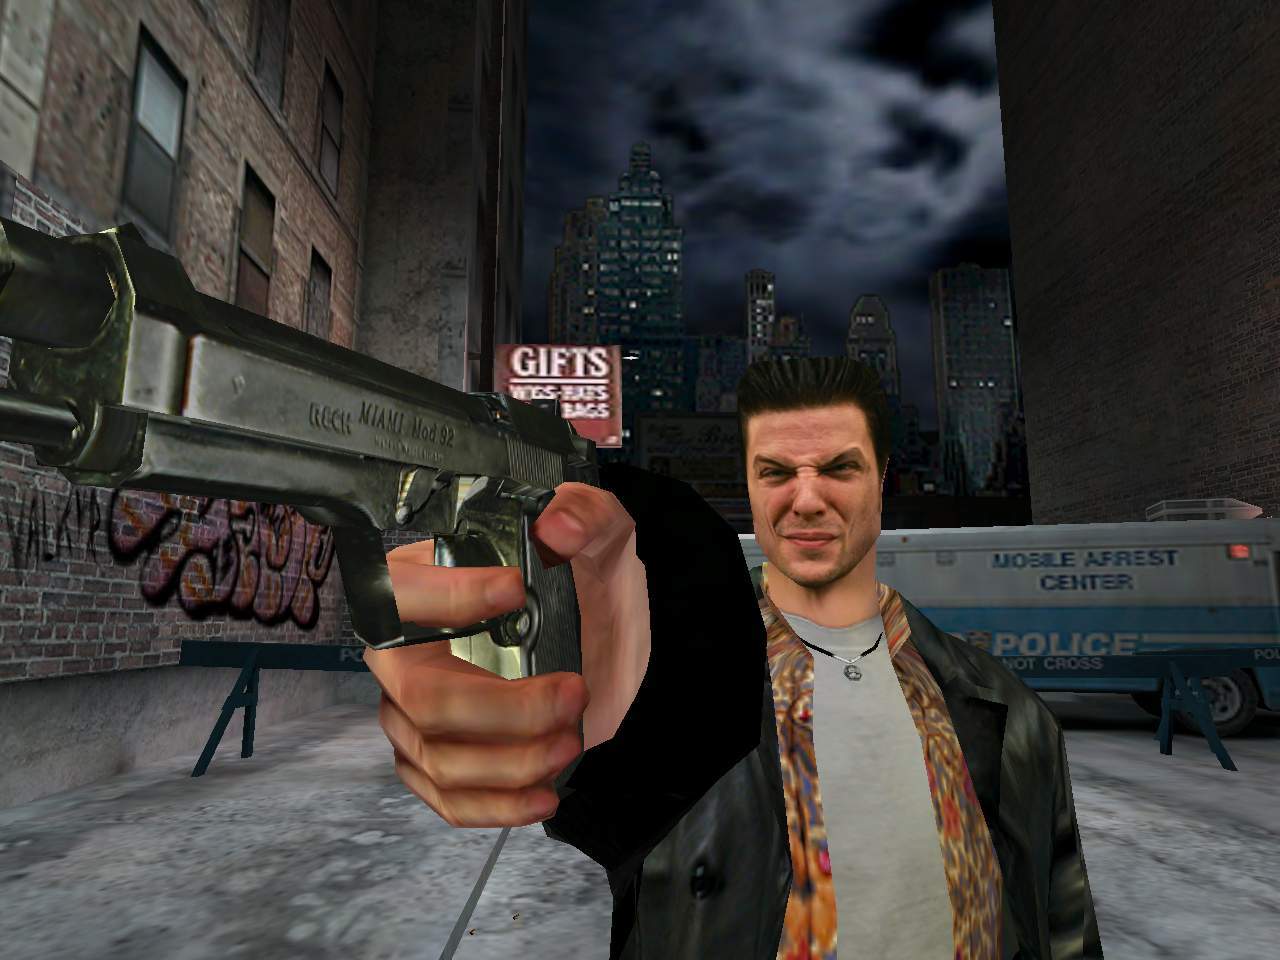 Max Payne Mobile now available through the App Store